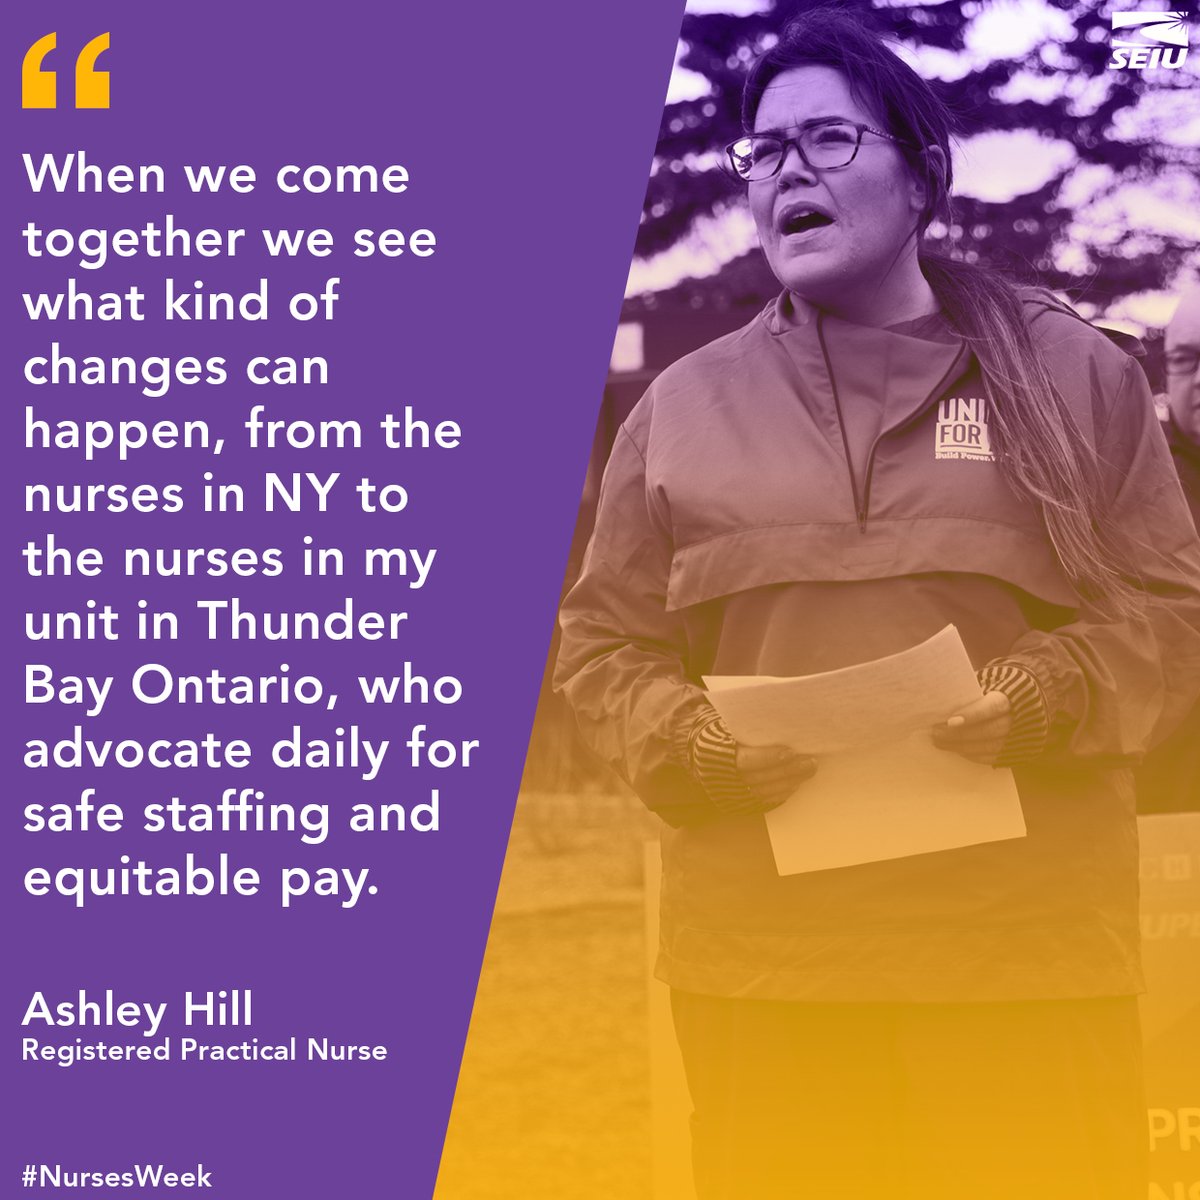 In honor of Nurses Week, we recognize and thank all of the nurses who are in the fight to improve staffing & safety for patients. Nurses like Ashley are joining together and raising their voices! #NursesWeek